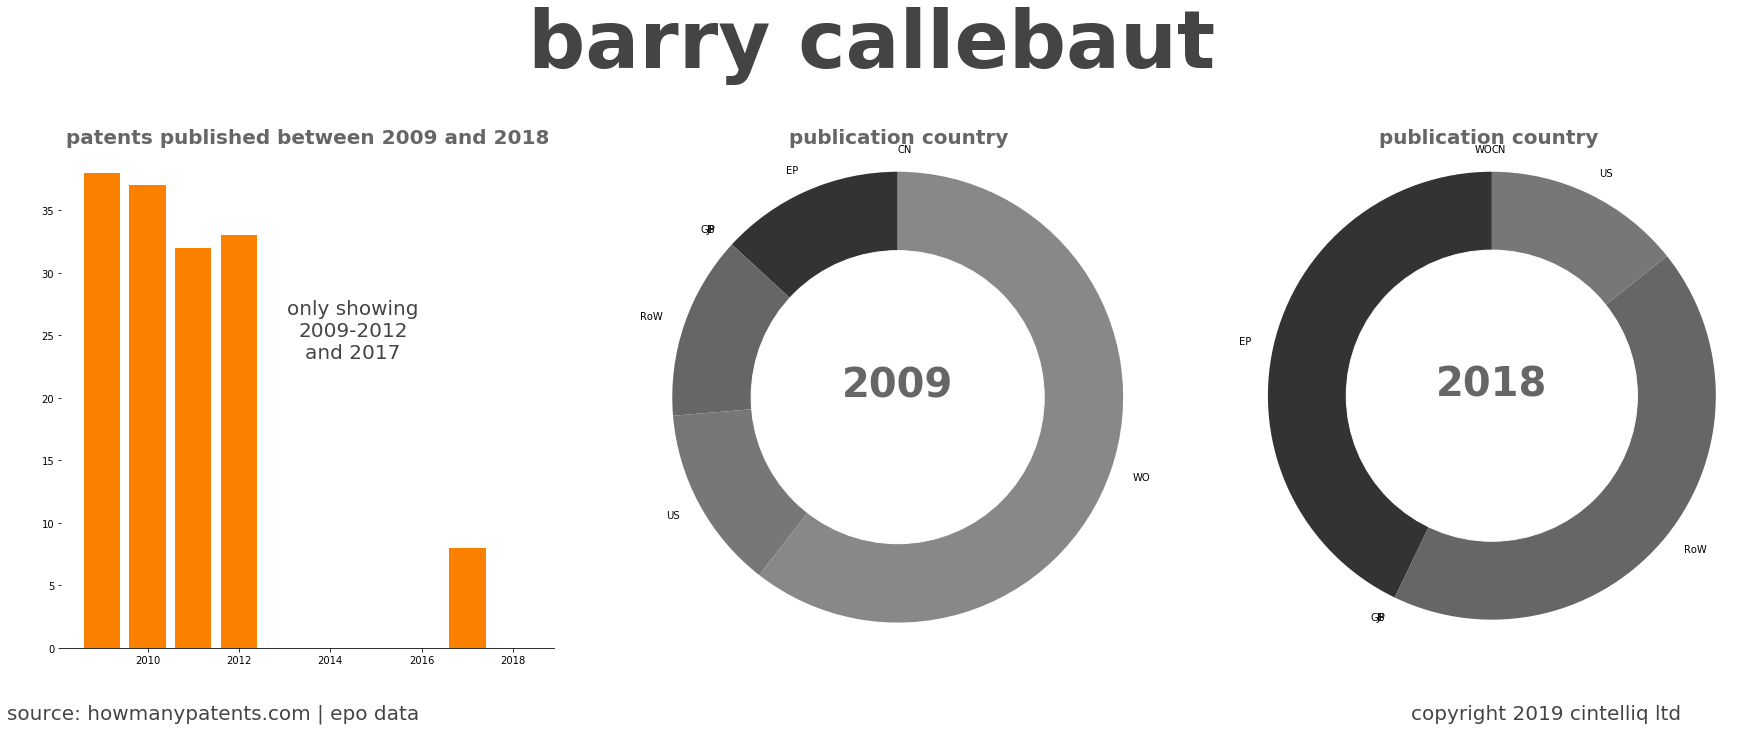 summary of patents for Barry Callebaut